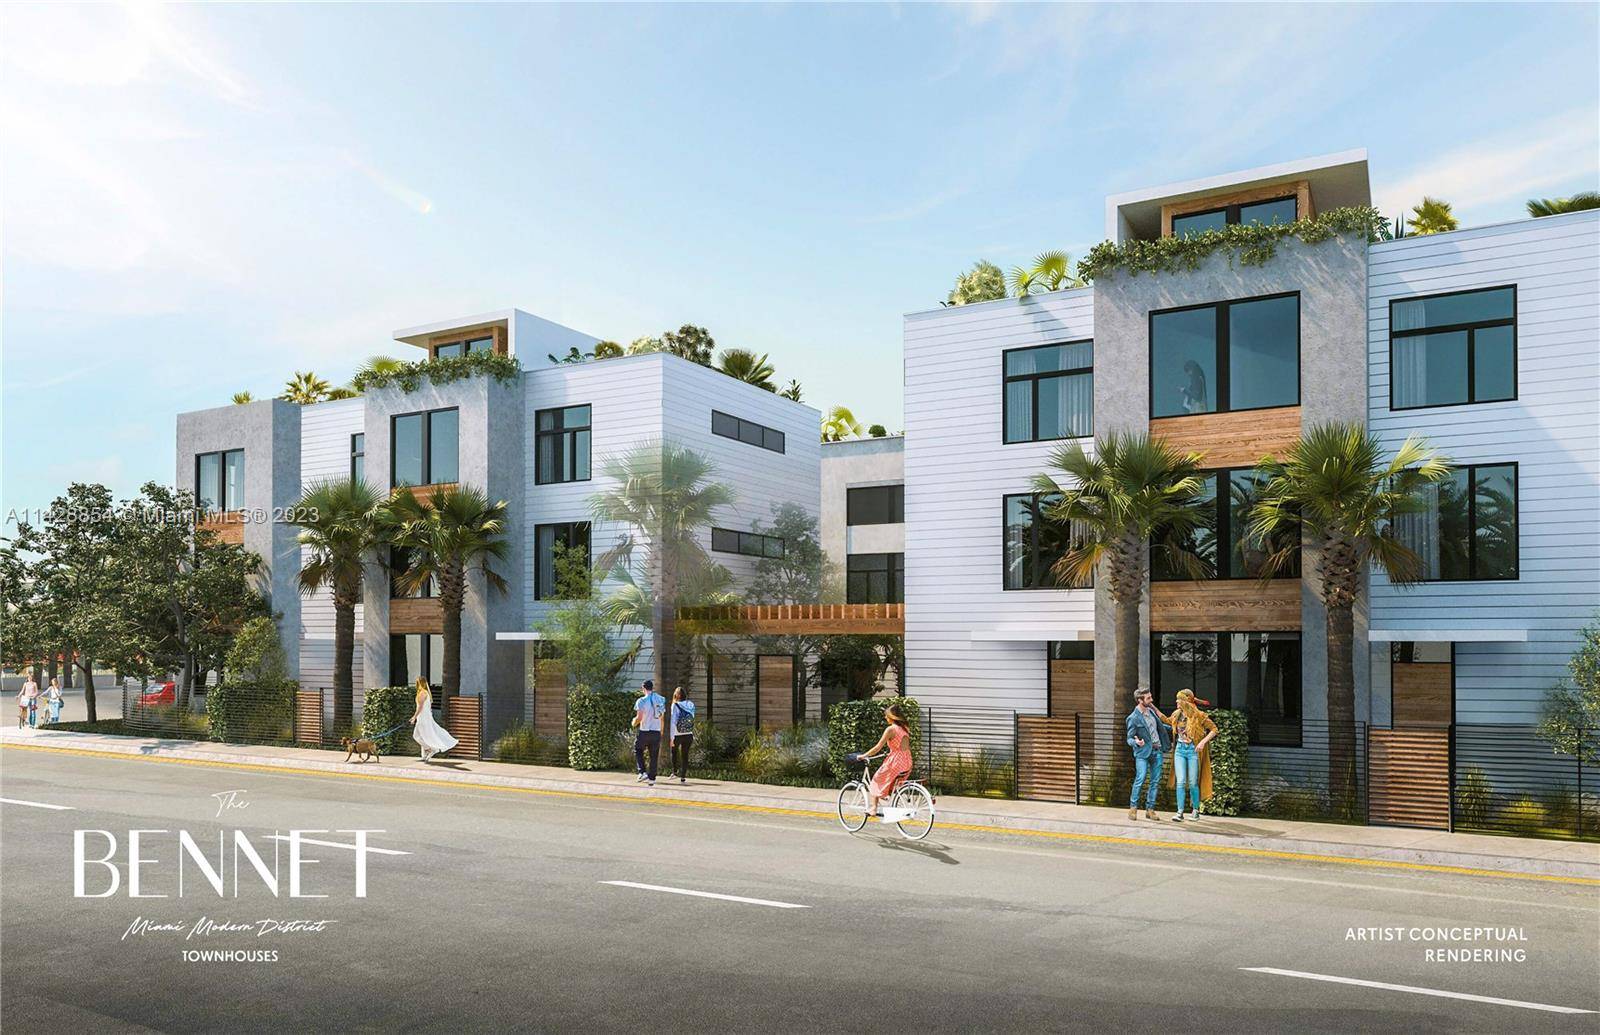 With a slender and exquisite design inspired by local architecture, The Bennet will become one of the sleekest residential developments in Miami MiMo District.